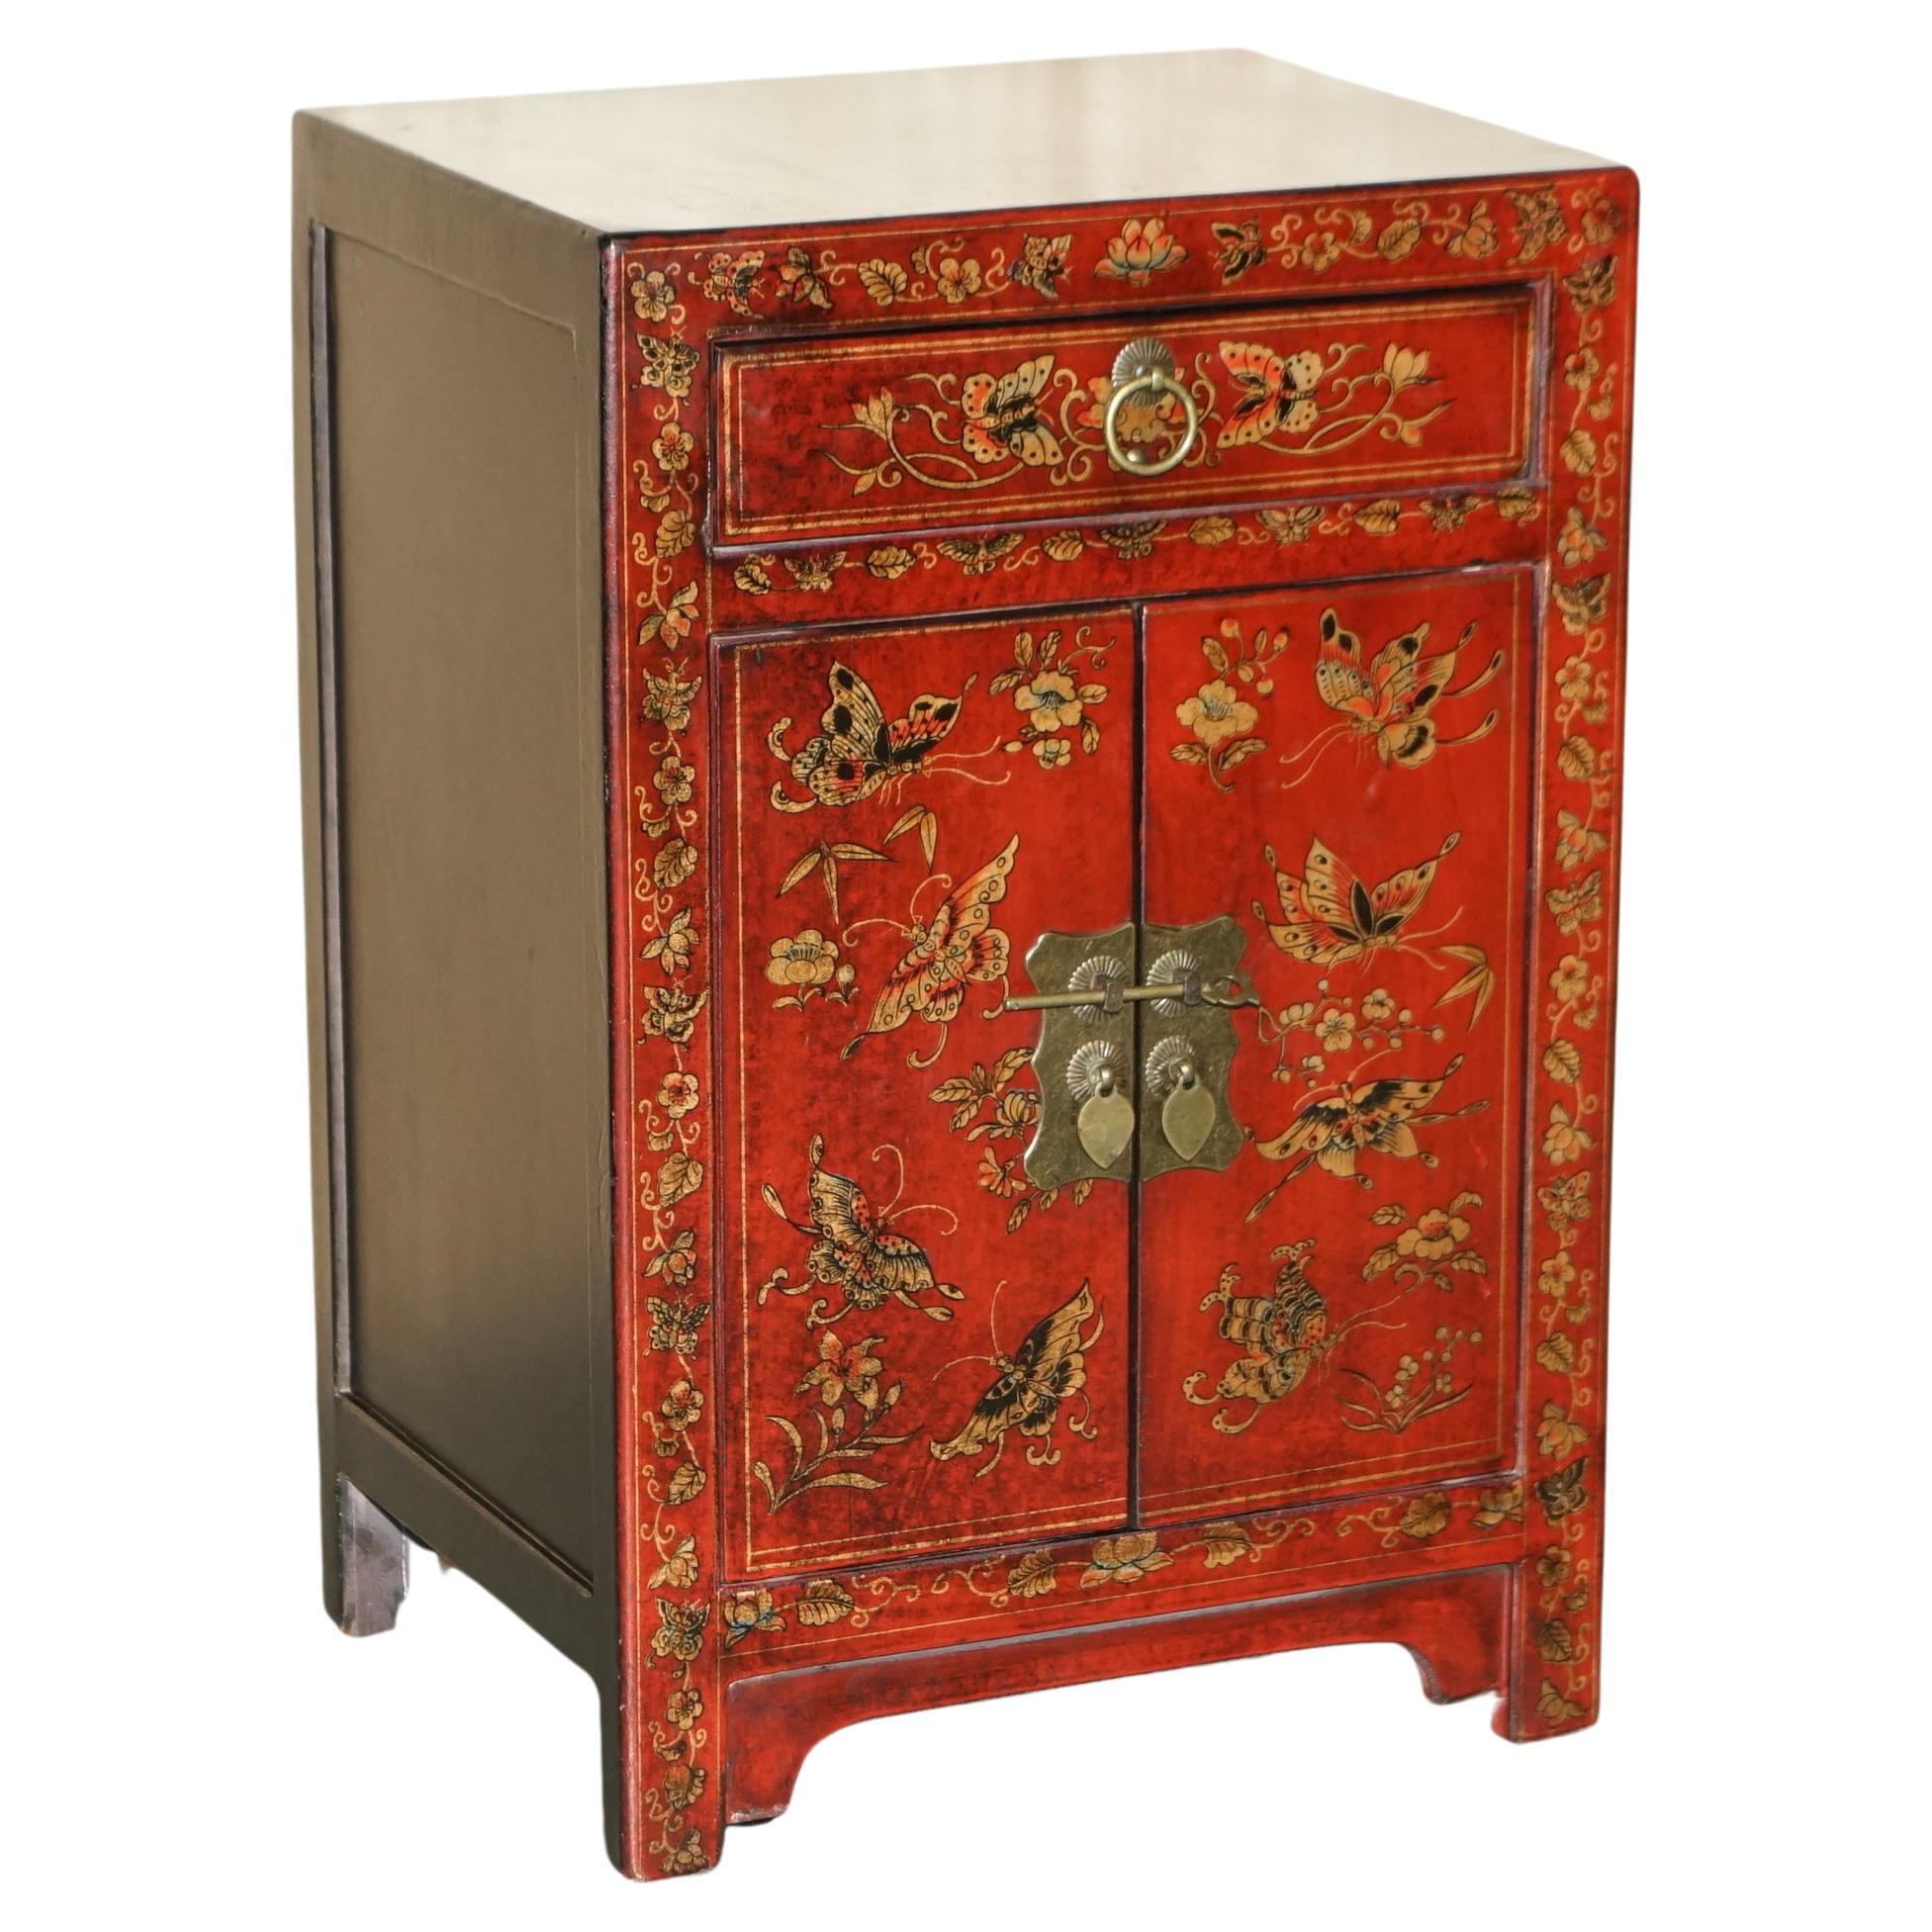 Vintage Chinese Hand Painted Lacquered Side Table Sized Schrank mit Schublade im Angebot